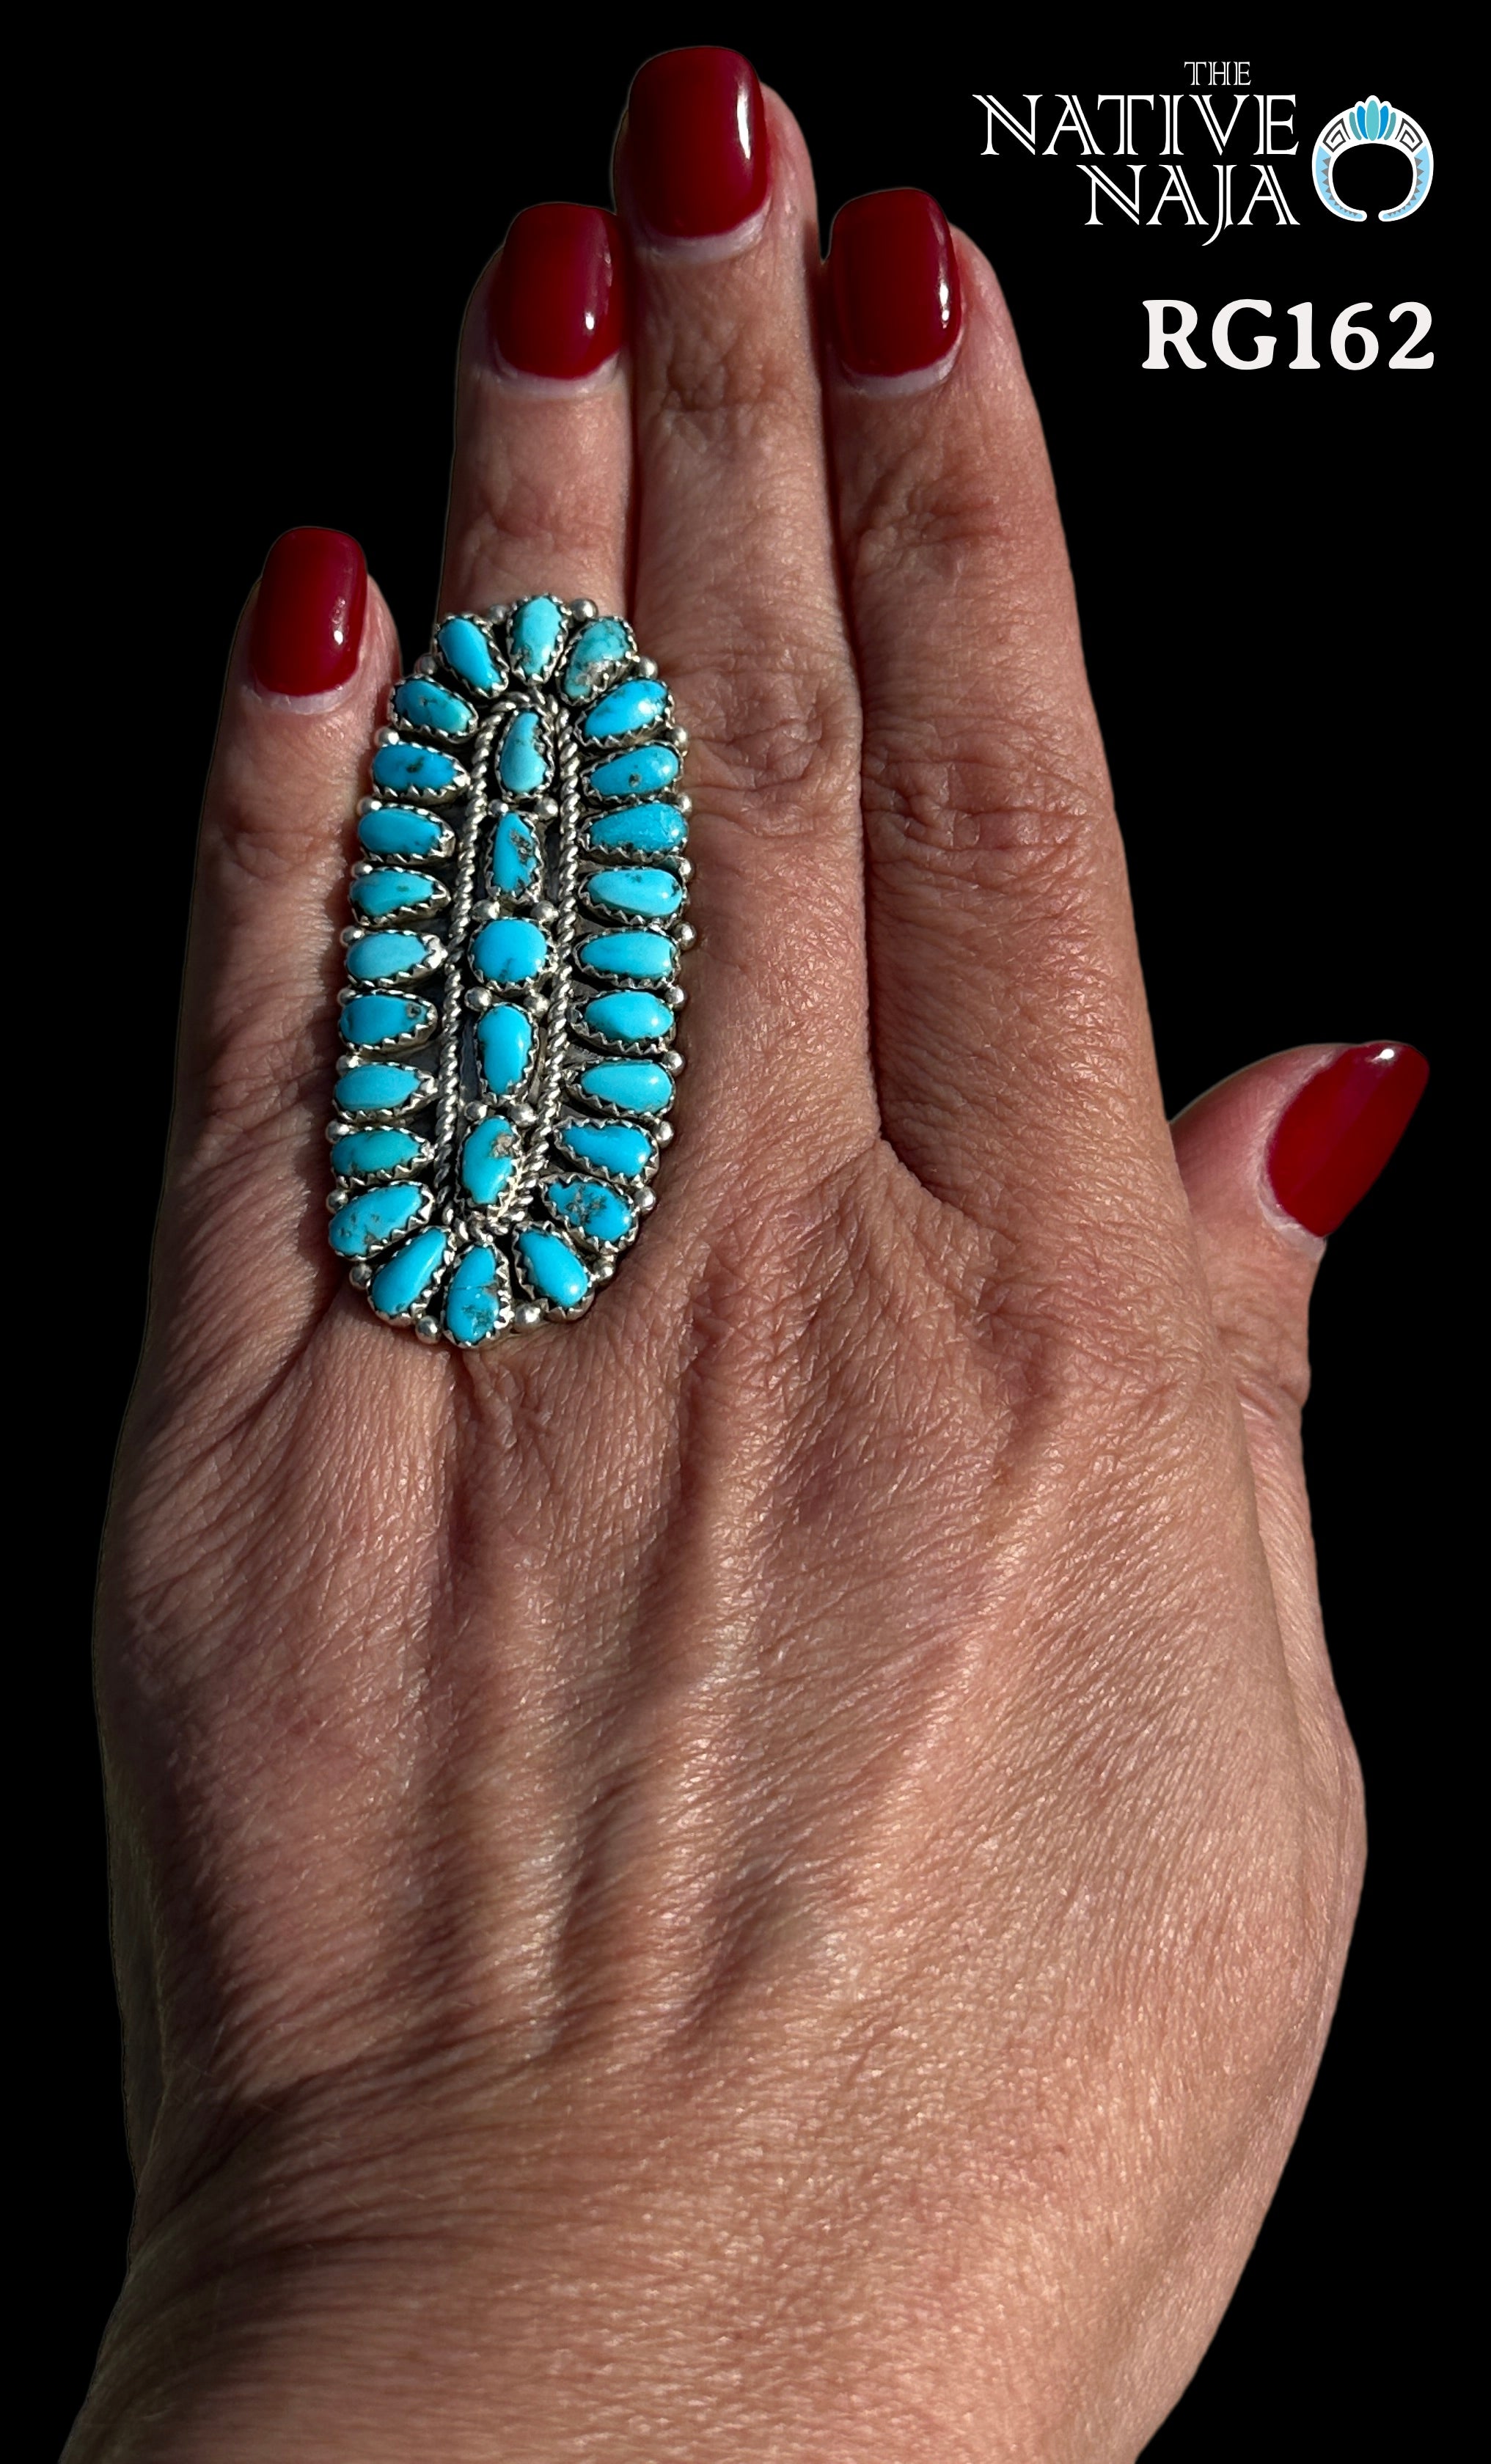 LRG Navajo Justina Wilson Petit Point Turquoise & Sterling Silver Ring Size 7 1/2 RG162